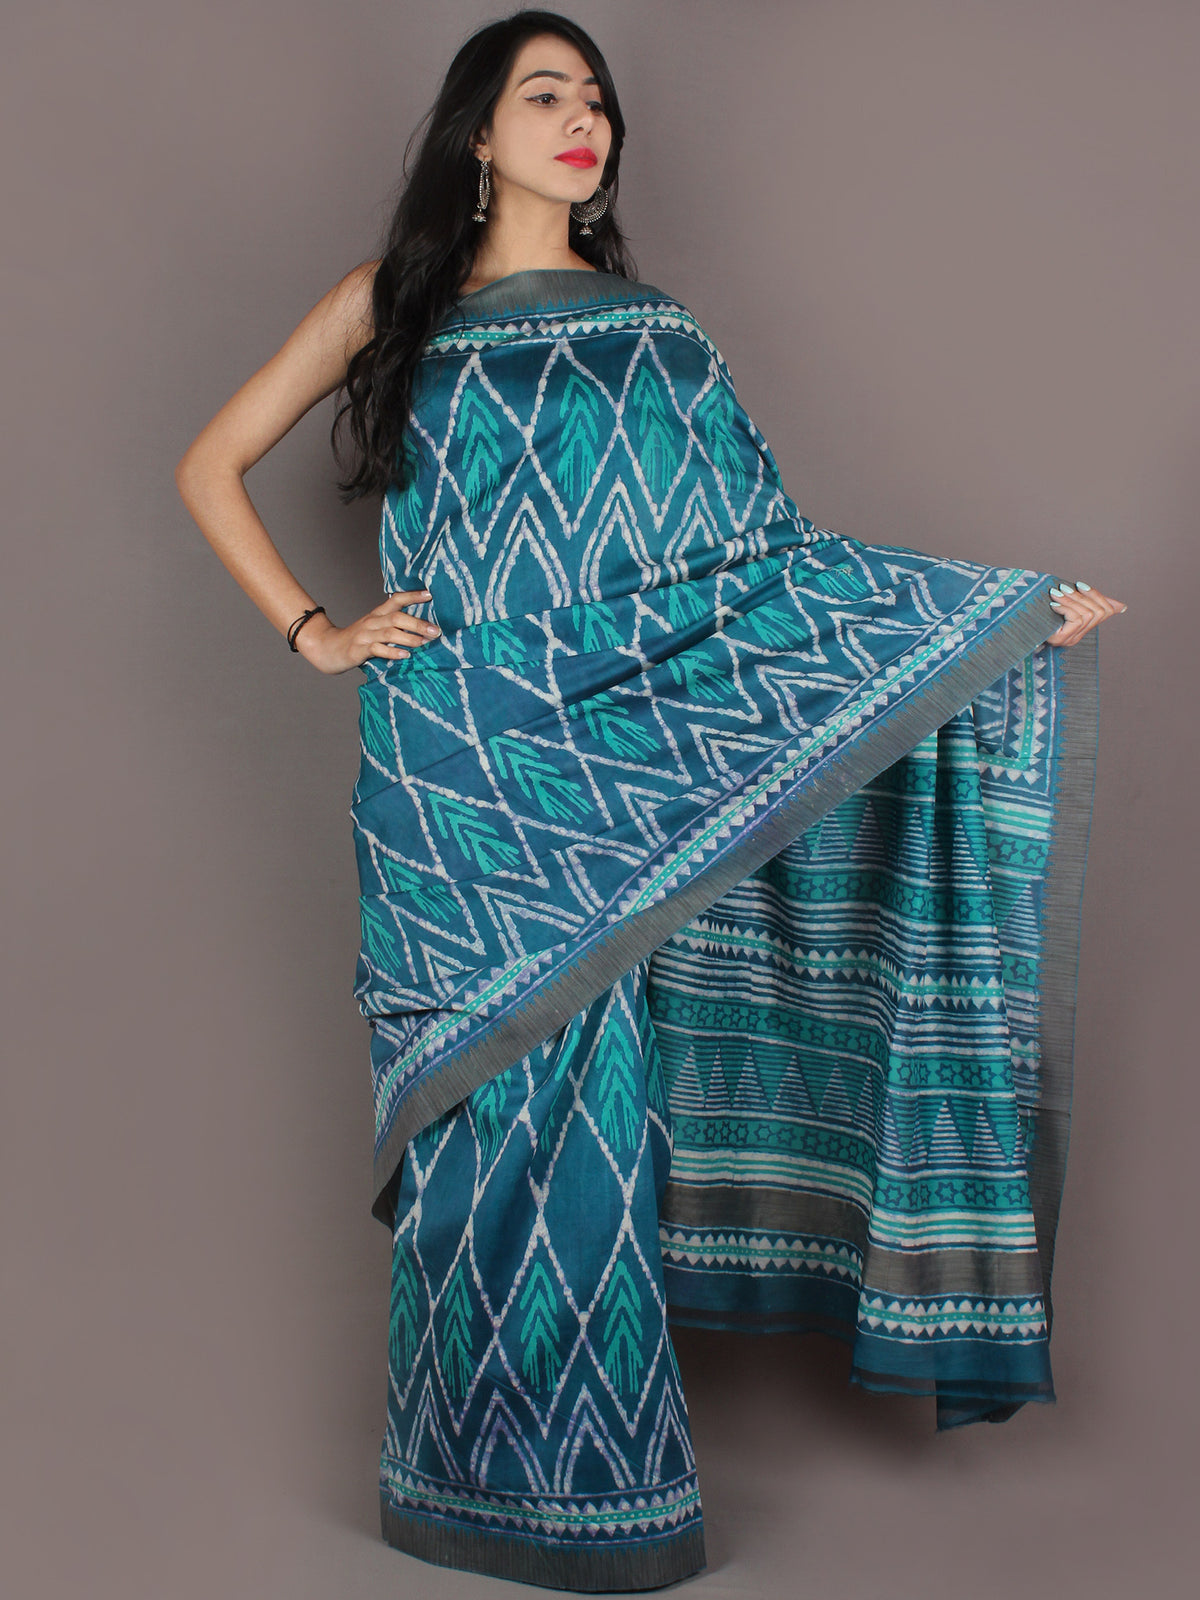 Teal Blue White Hand Block Printed in Natural Colors Chanderi Saree With Geecha Border - S031701002